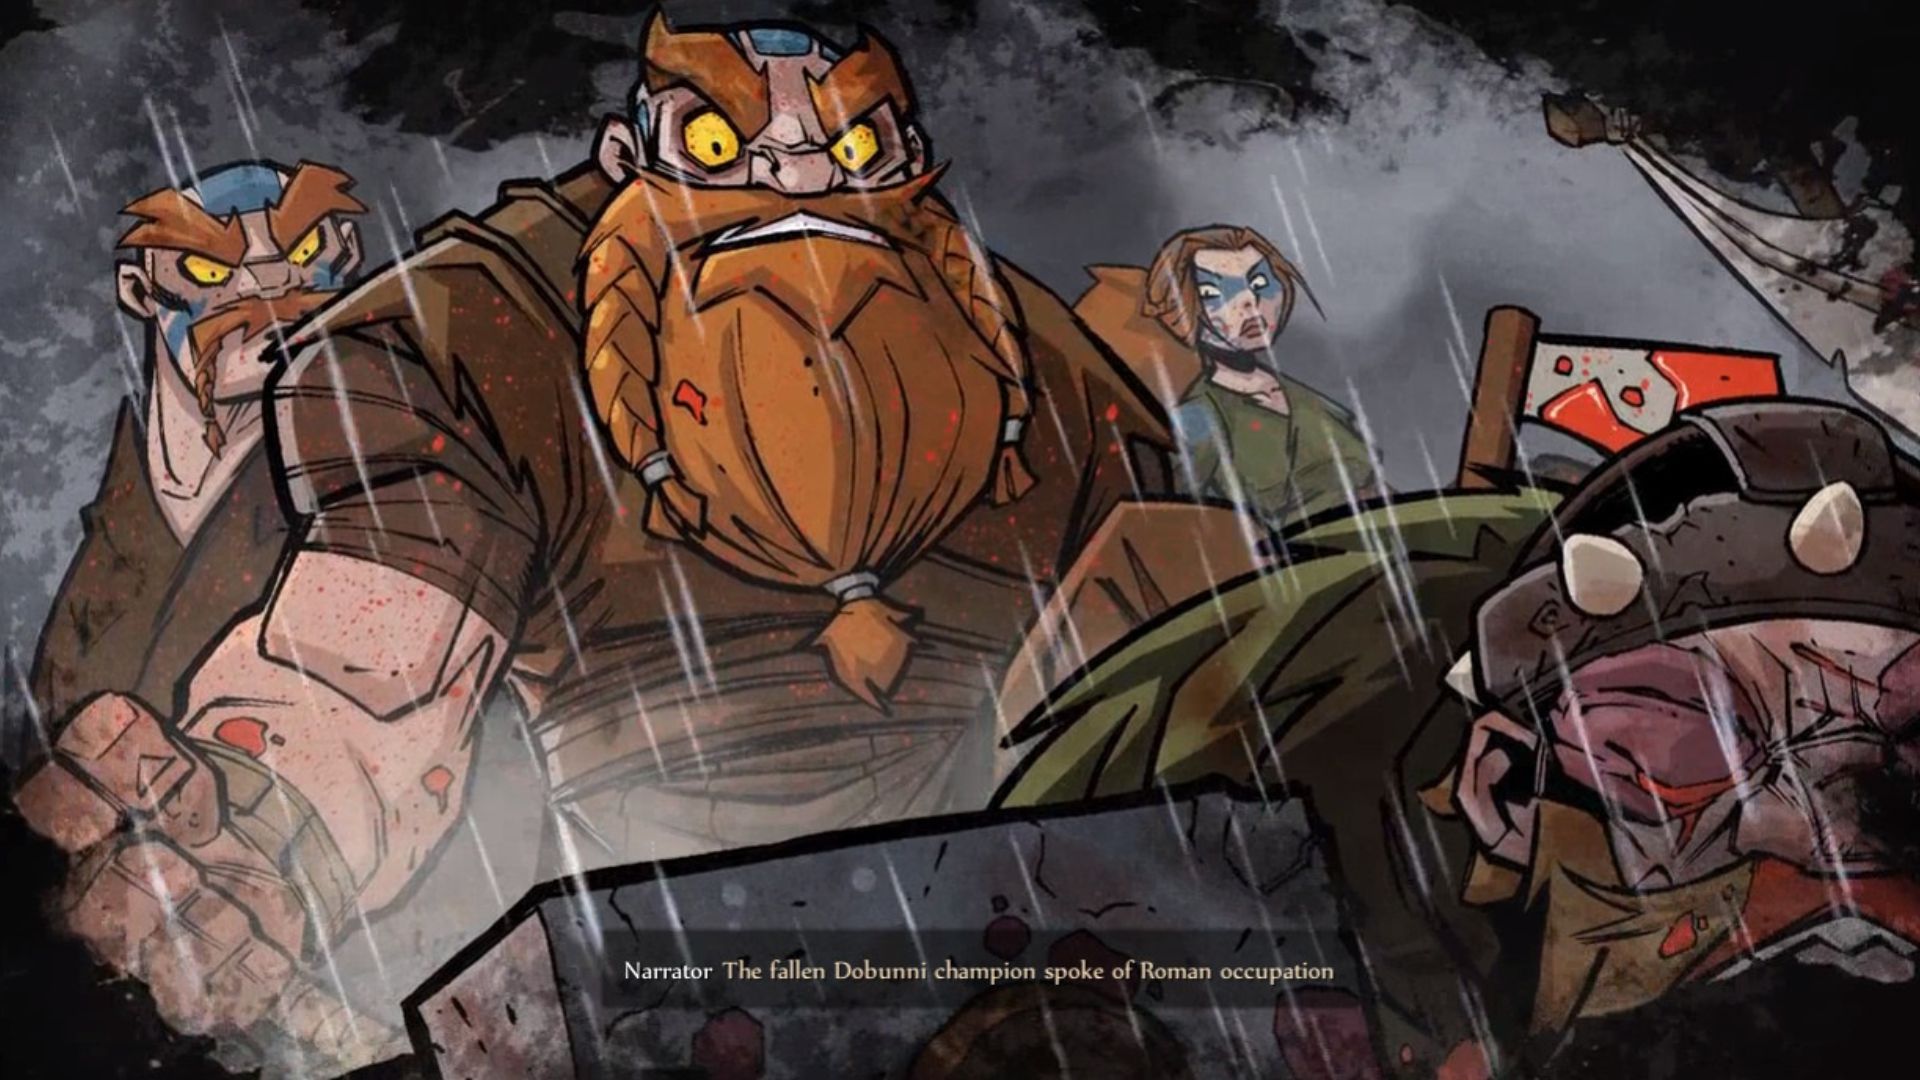 Best history games: Wulverblade. Image shows man with red beards looking over an injured man in the rain.